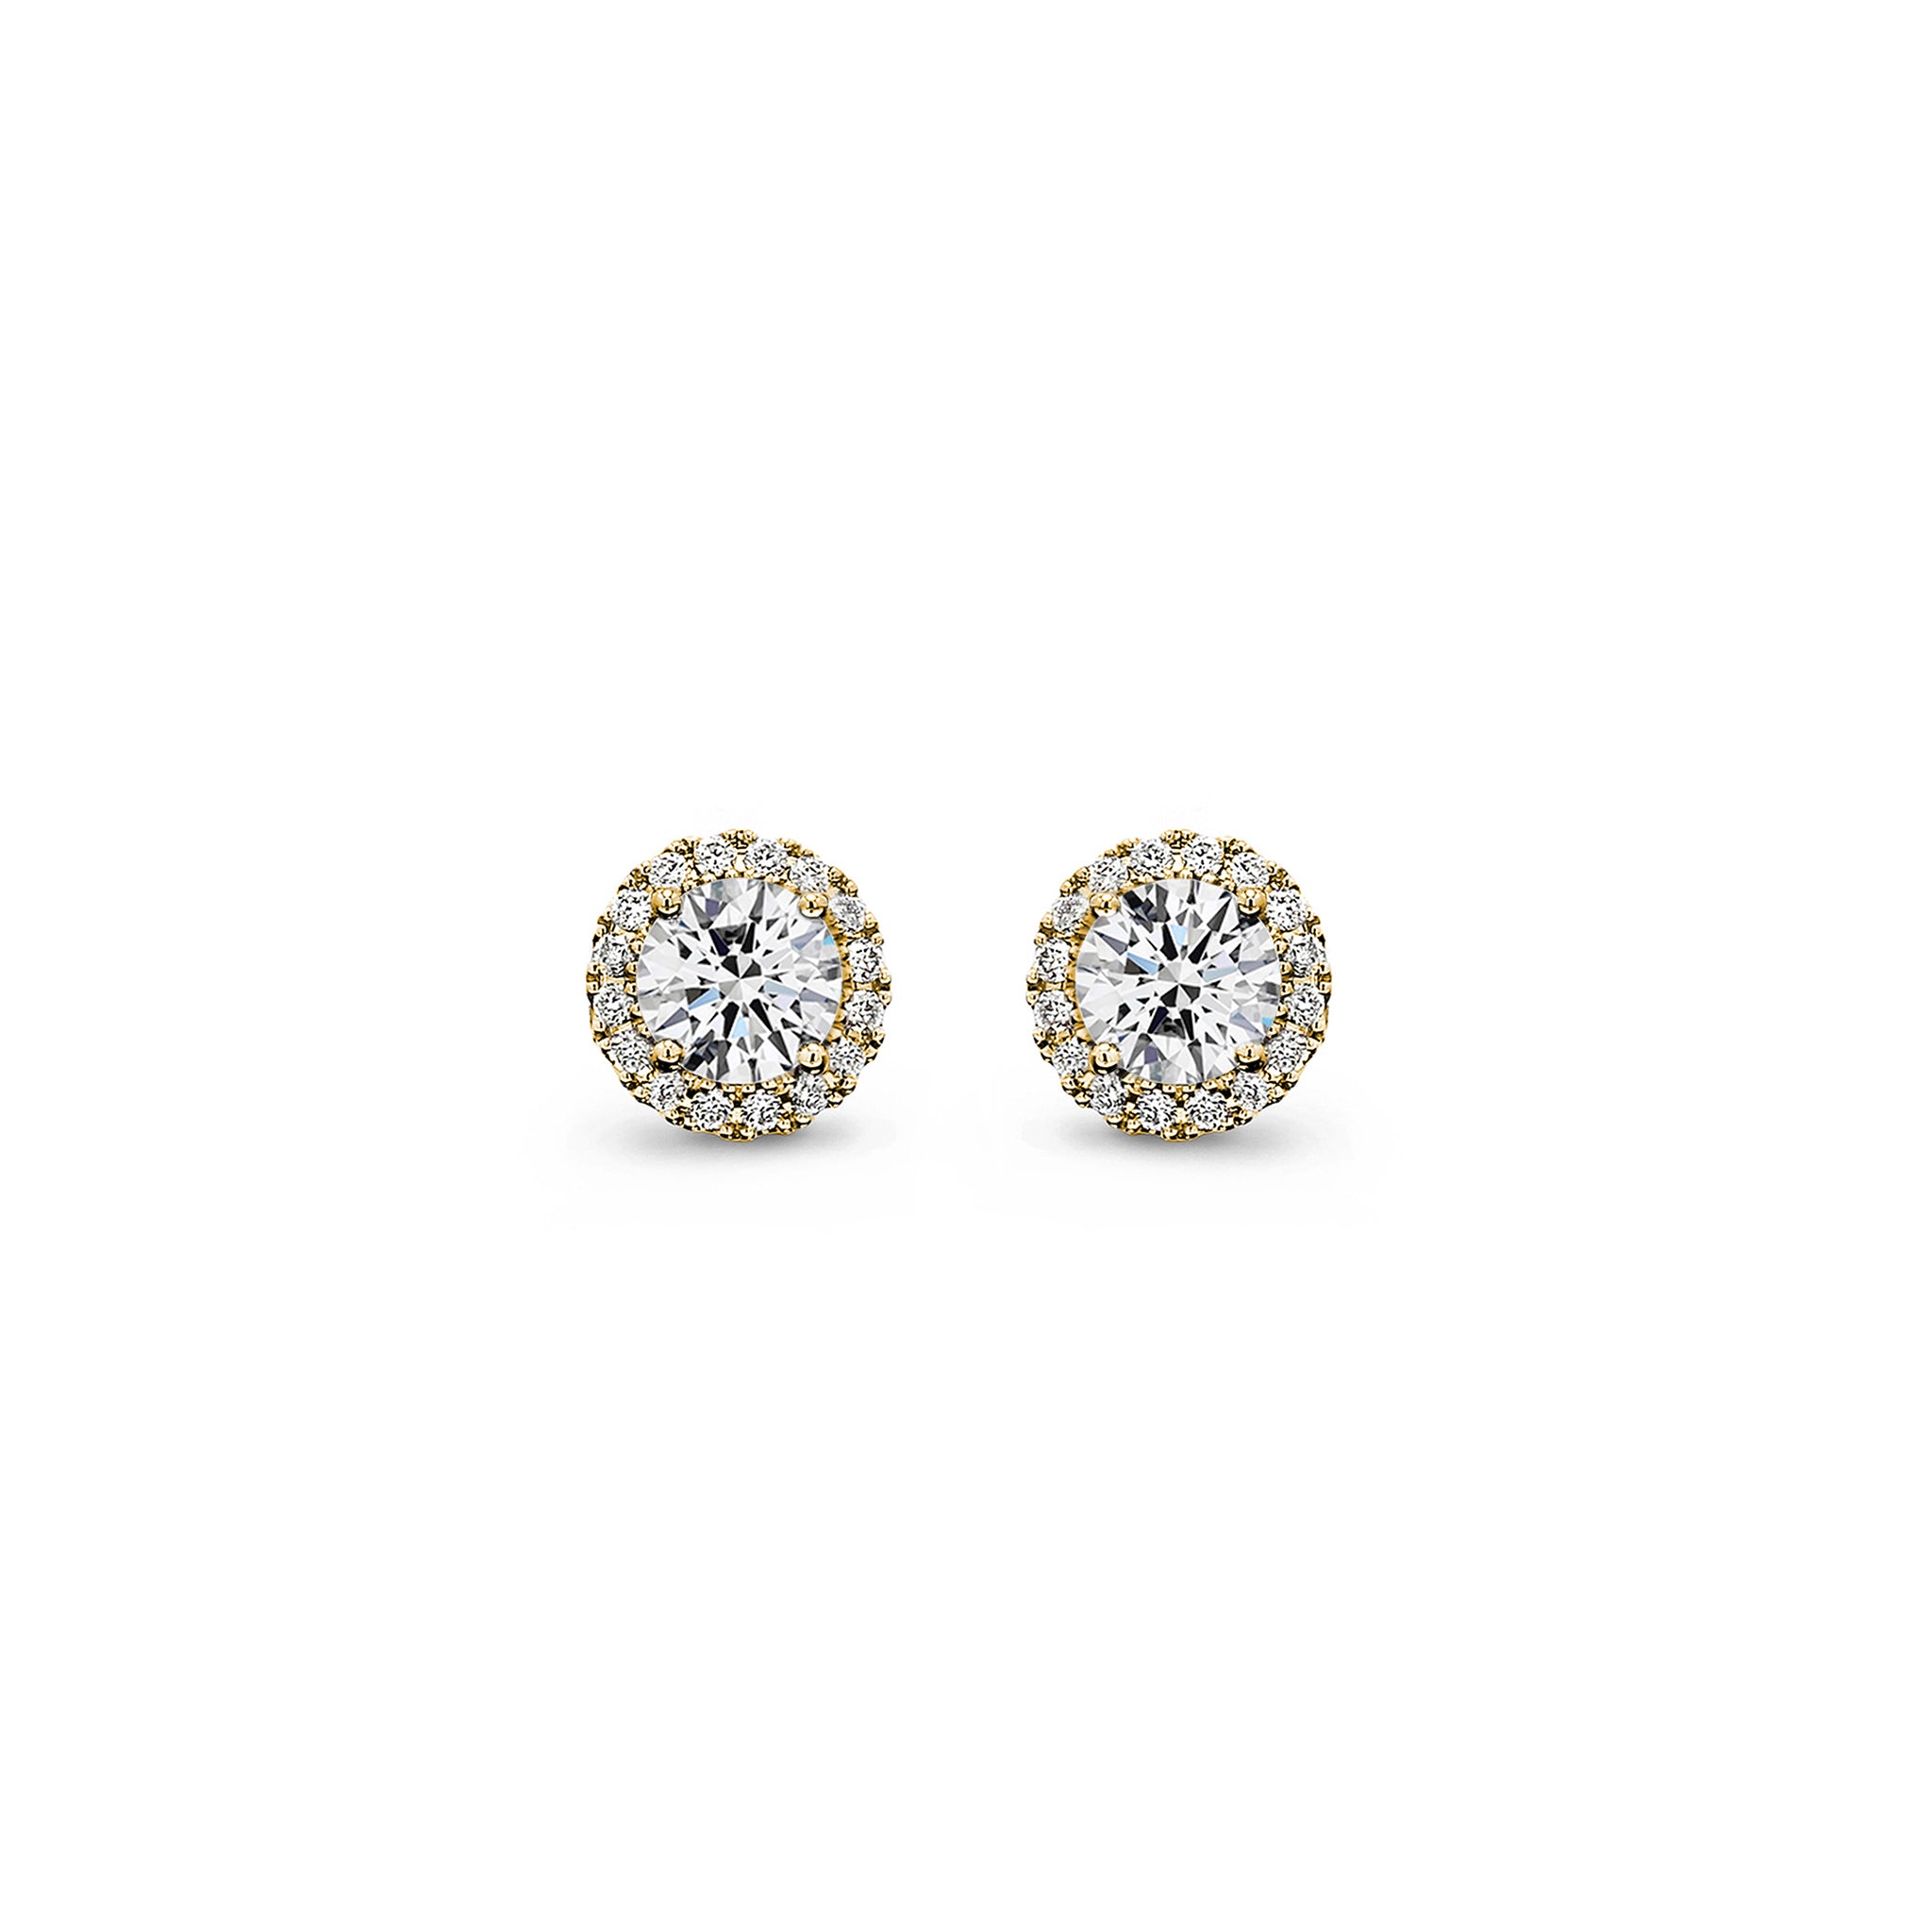 Shimansky - Diamond Microset Halo Earrings 0.30ct crafted in 18K Yellow Gold